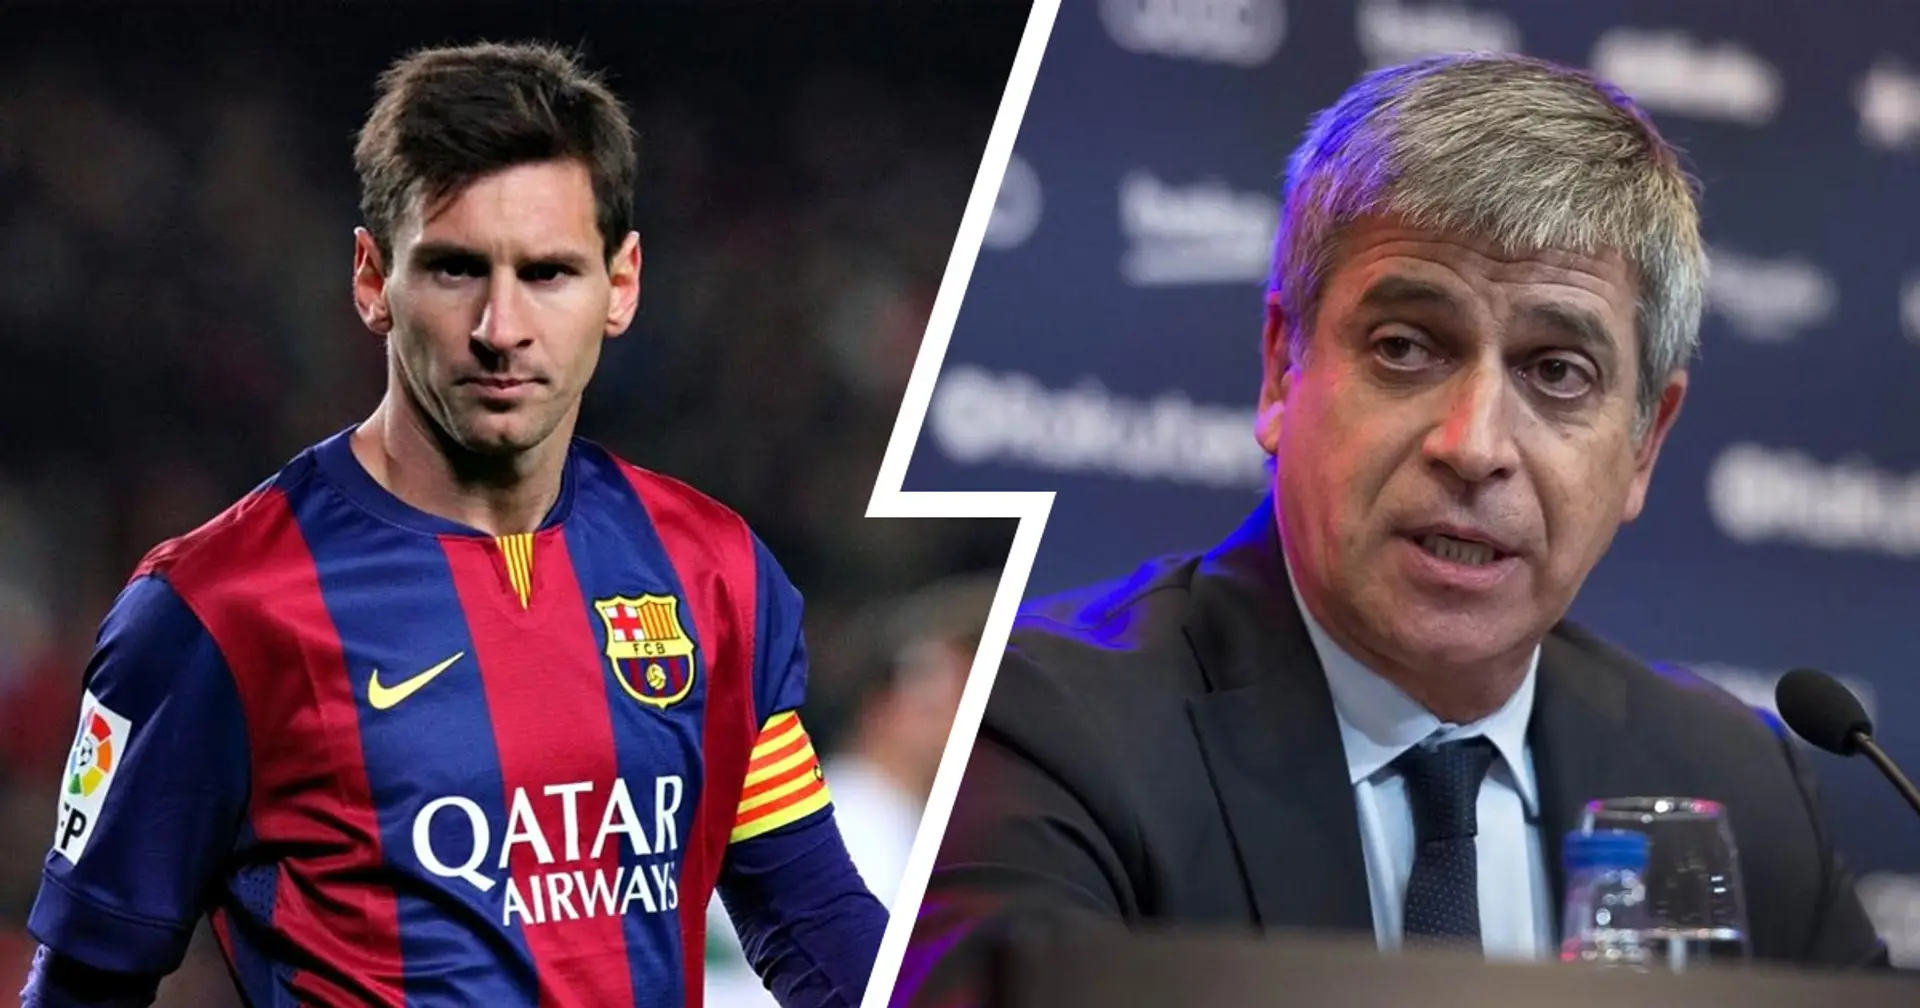 Ex-Barca director Mestre says Messi 'wanted to leave in 2015' as he accuses Real Madrid of Leo's contract leak